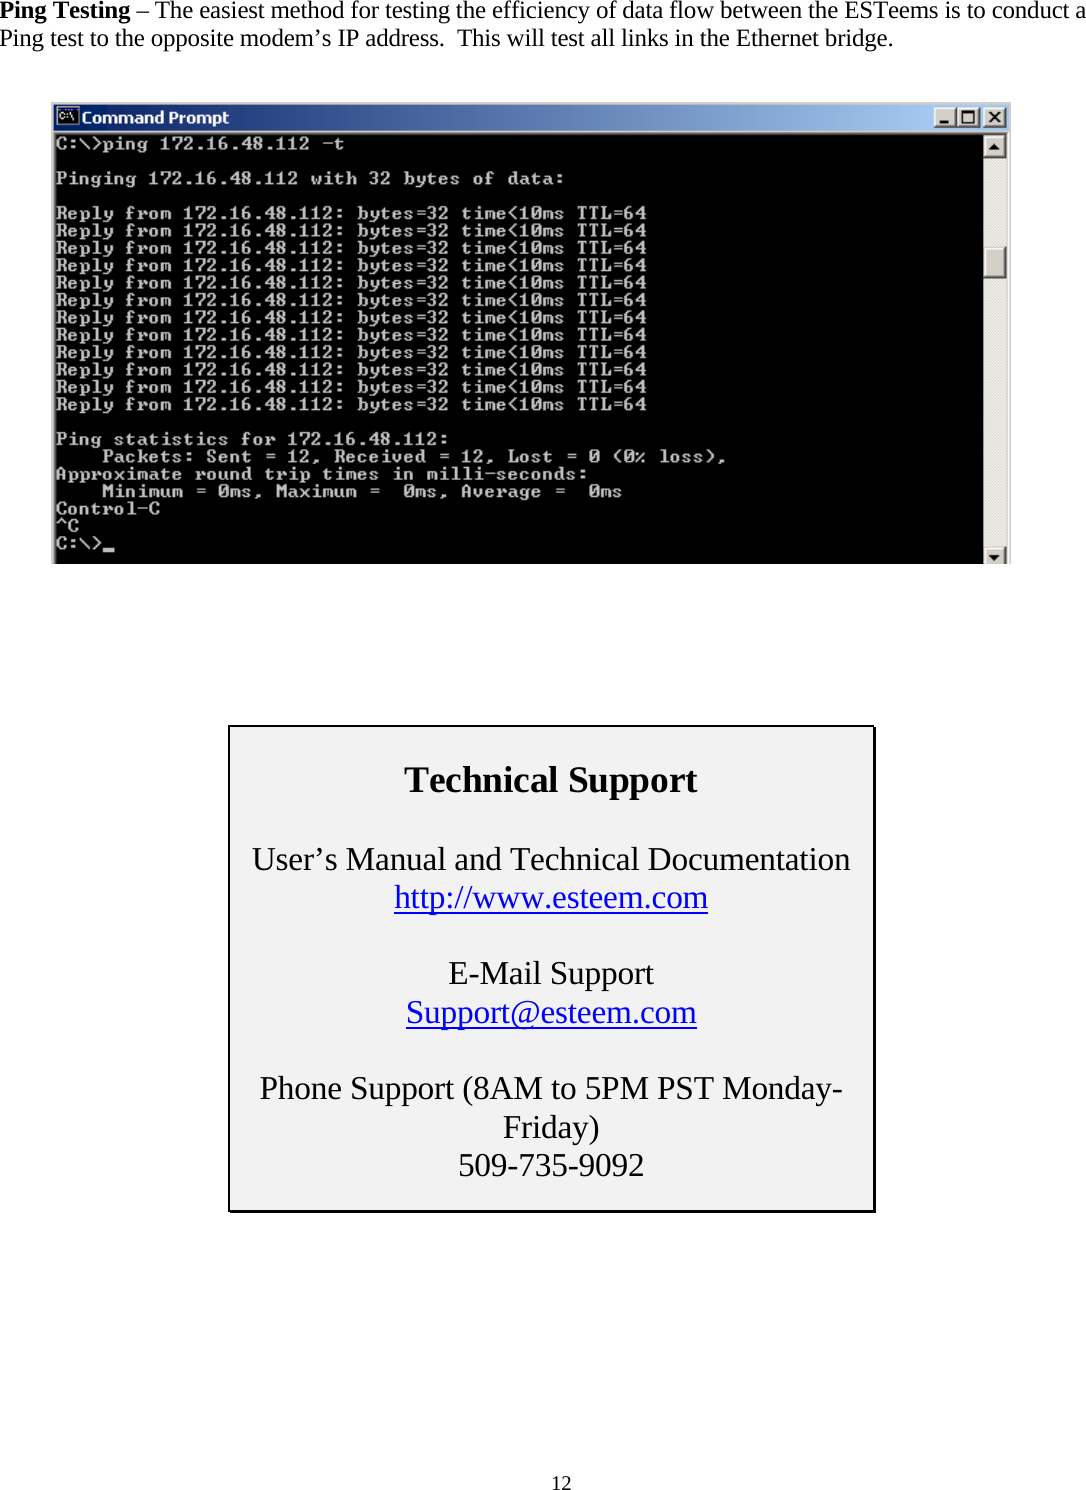 Ping Testing – The easiest method for testing the efficiency of data flow between the ESTeems is to conduct a Ping test to the opposite modem’s IP address.  This will test all links in the Ethernet bridge.         Technical Support  User’s Manual and Technical Documentation http://www.esteem.com  E-Mail Support Support@esteem.com  Phone Support (8AM to 5PM PST Monday-Friday) 509-735-9092     12 